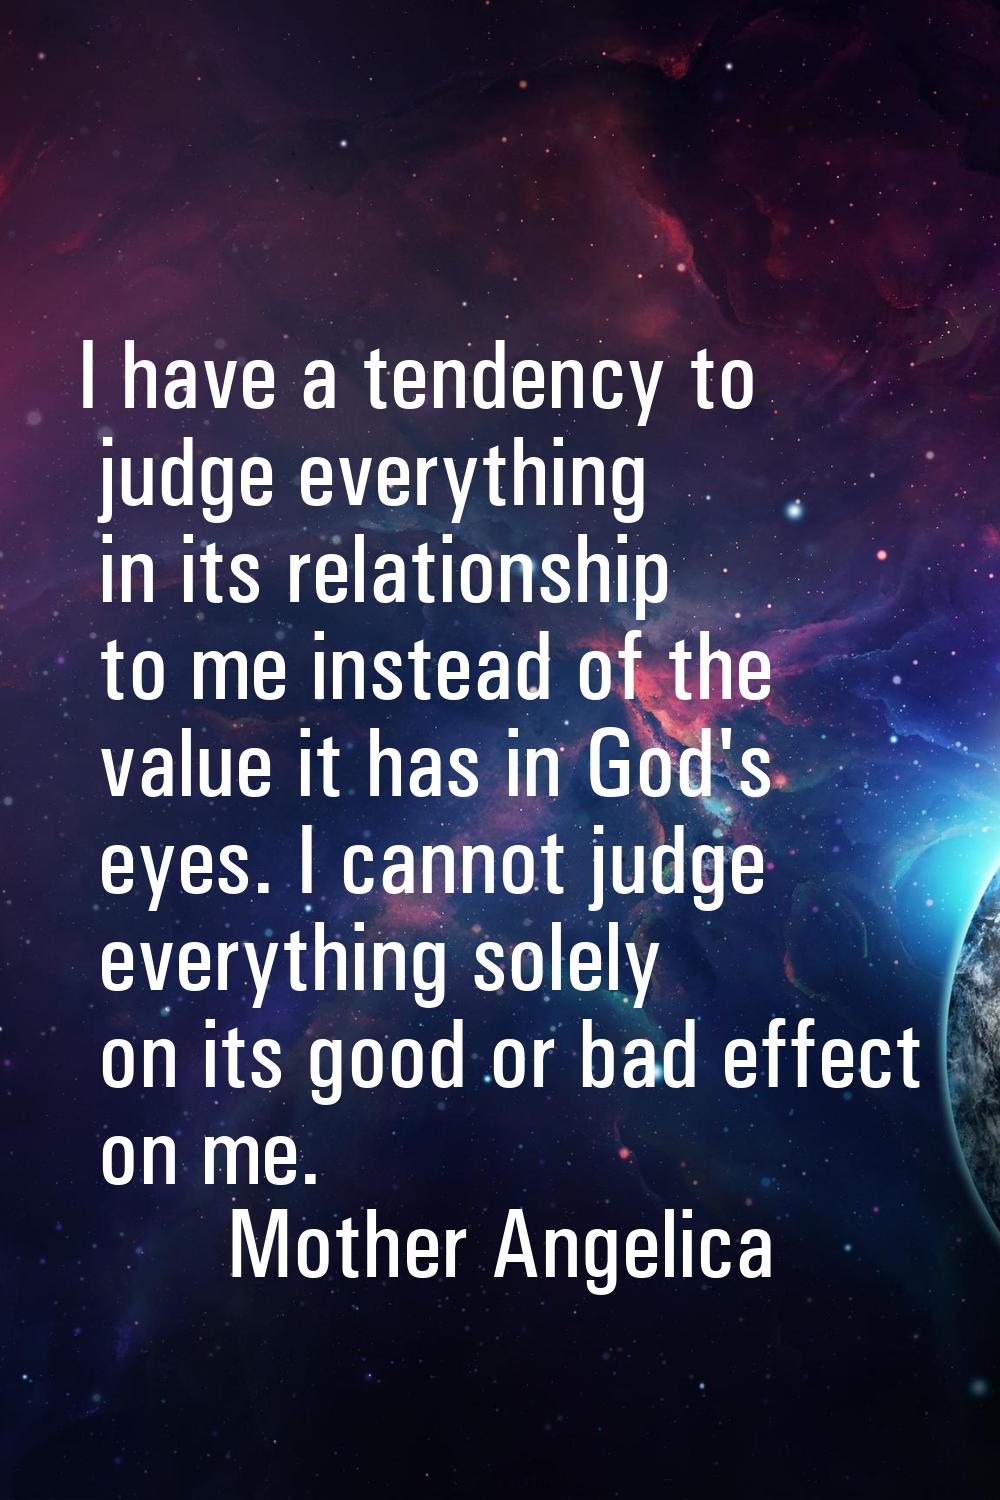 I have a tendency to judge everything in its relationship to me instead of the value it has in God'